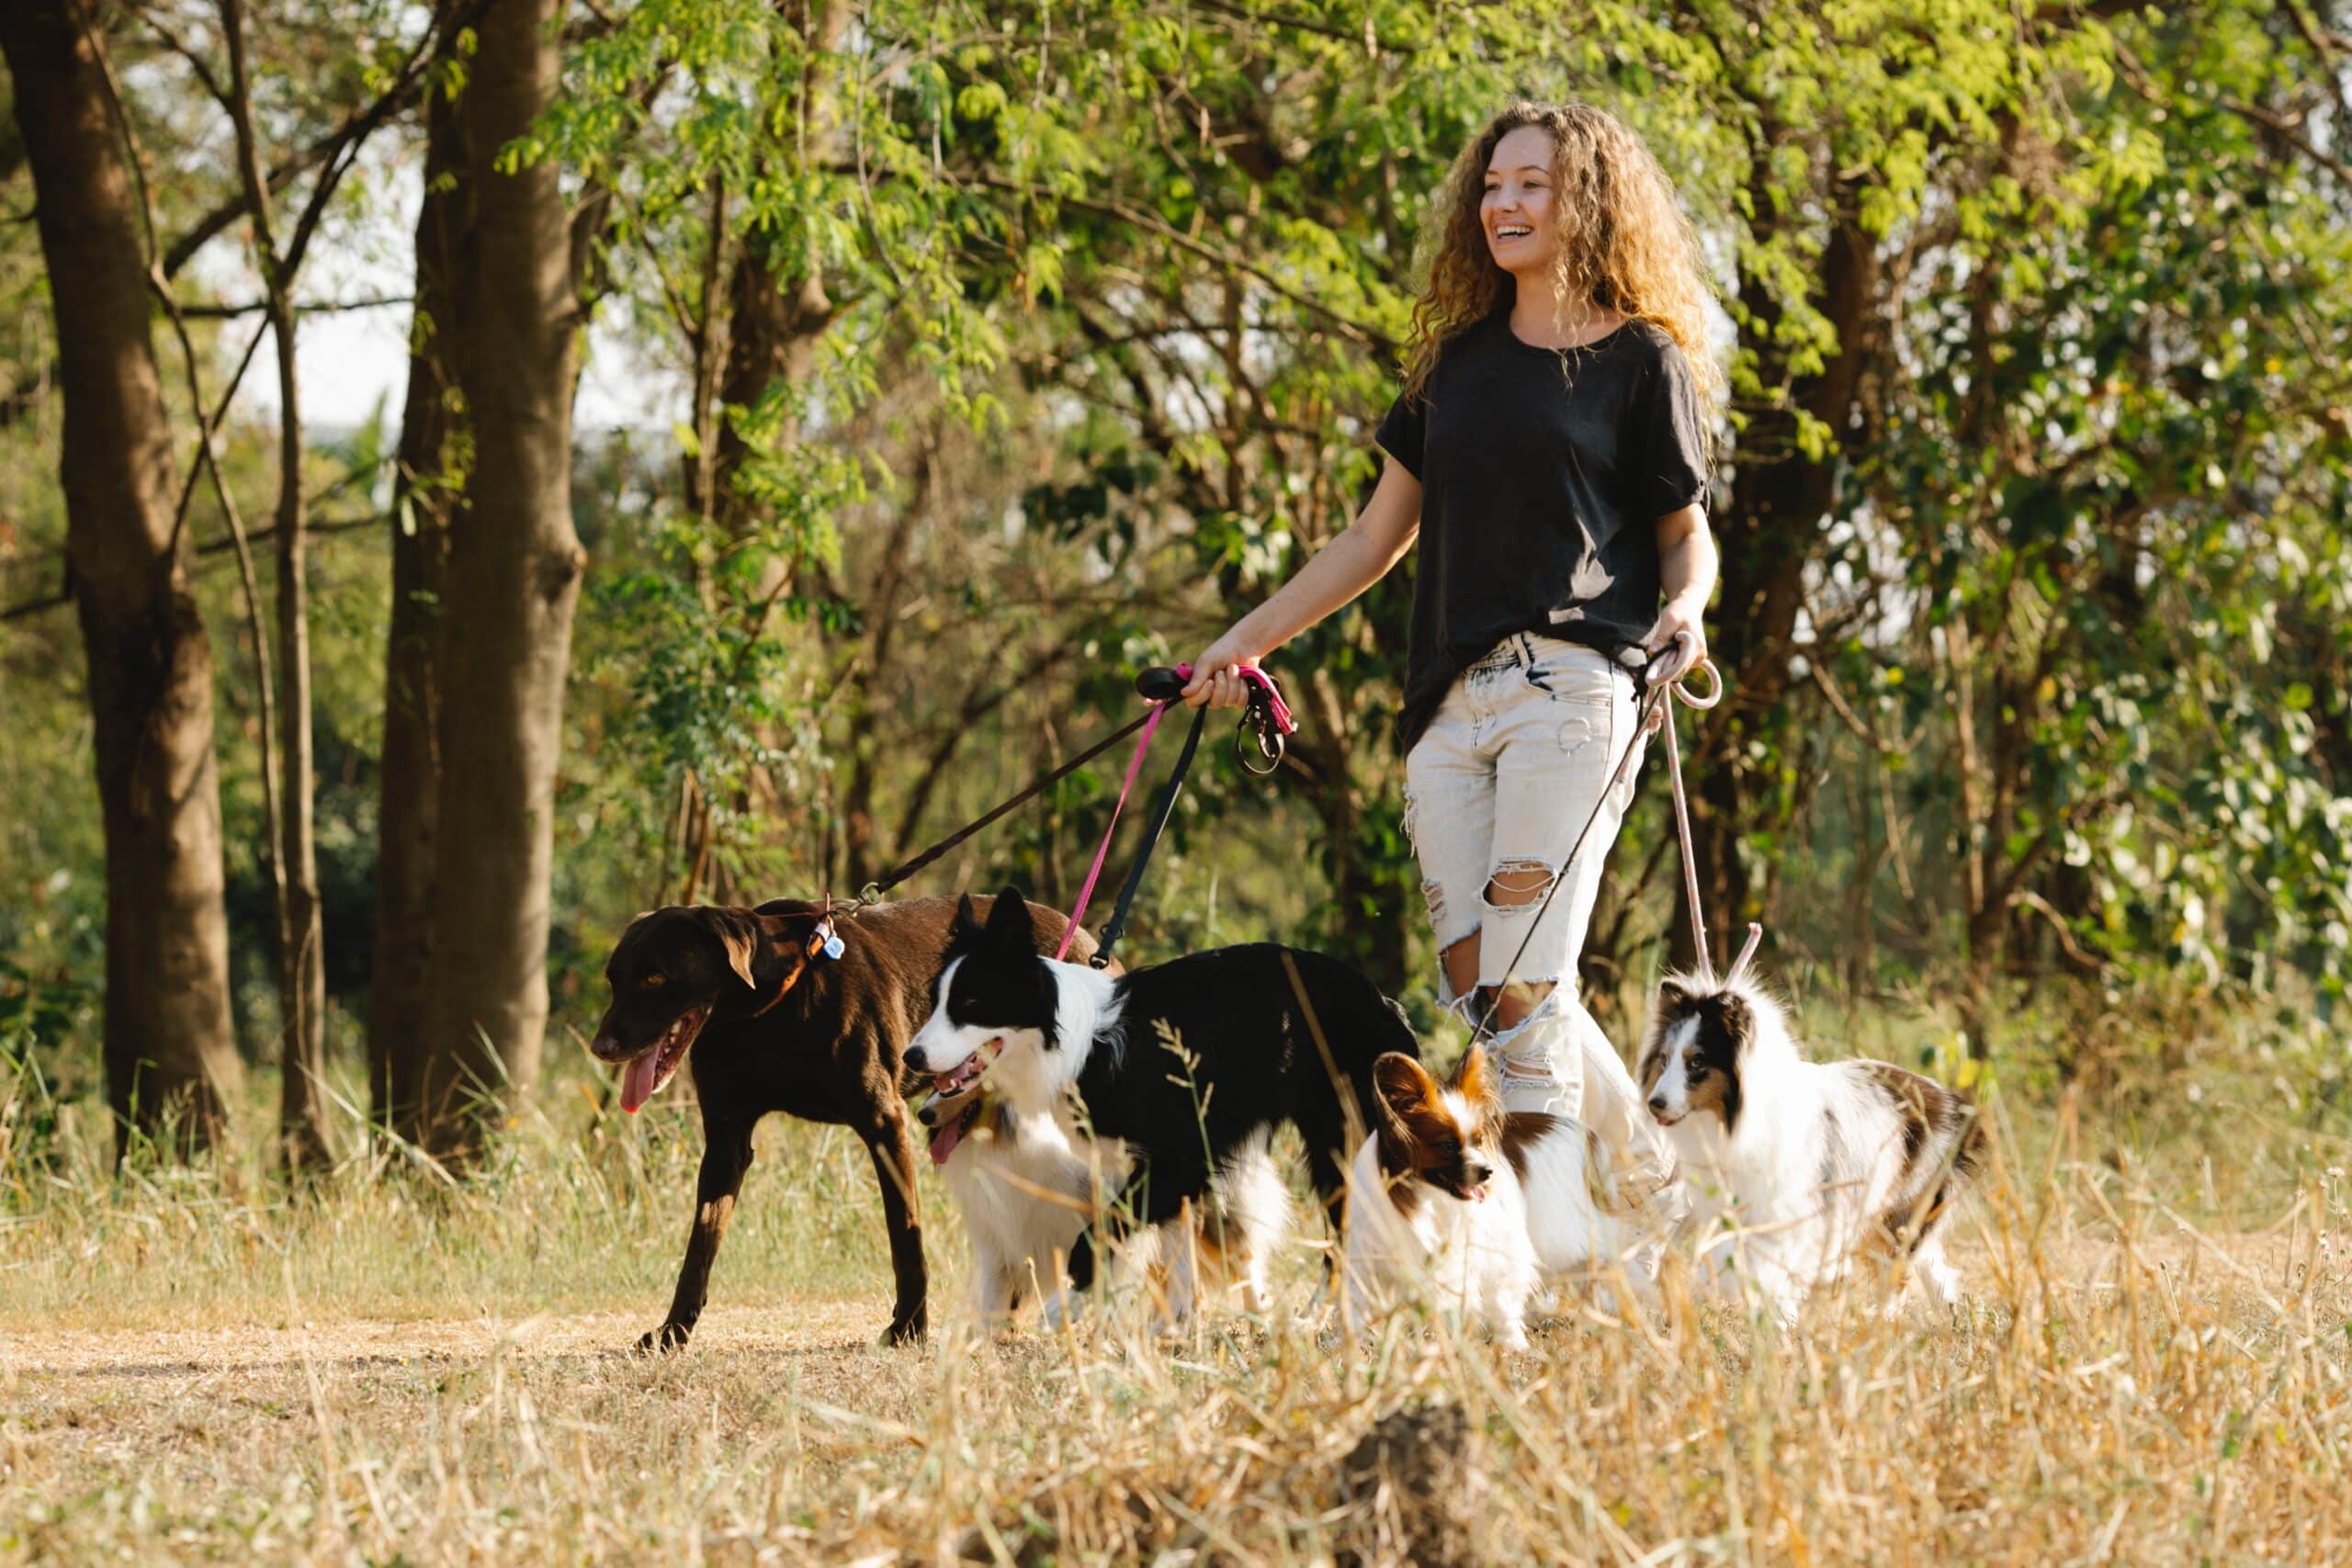 A Young Woman Dog Walking a Group of Dogs in a Park